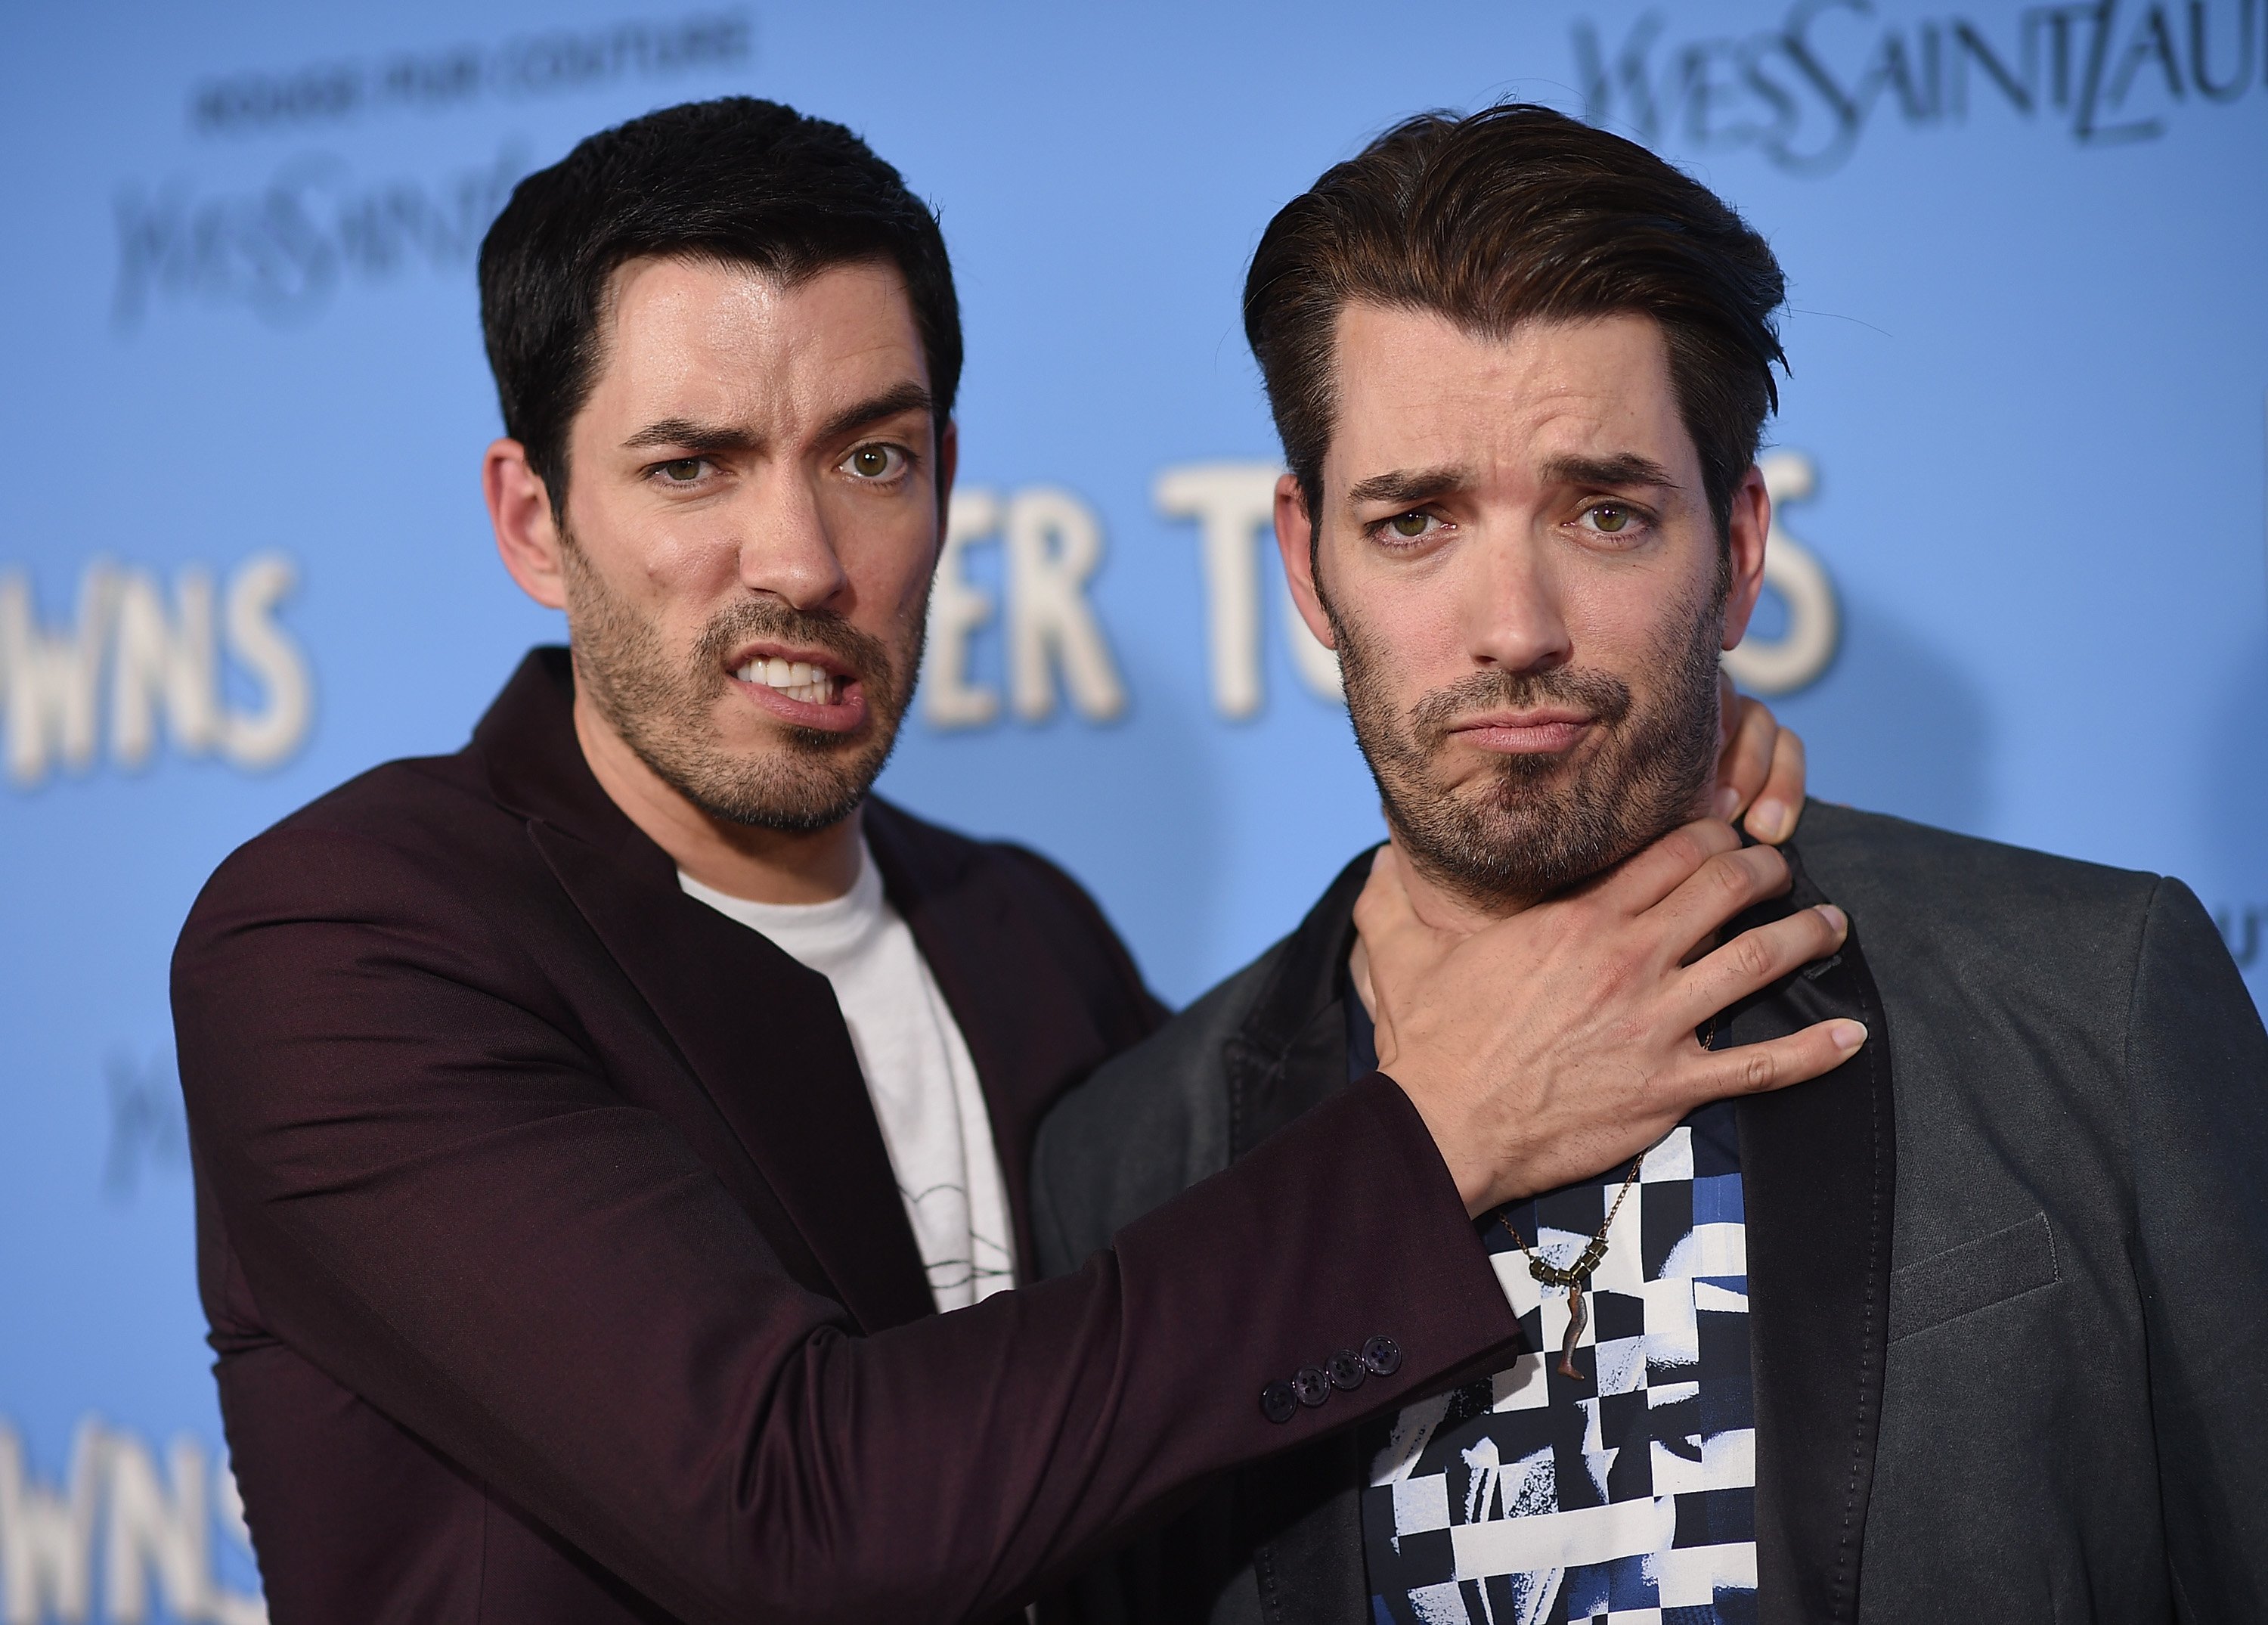 Jonathan and Drew Scott attend the premiere of "Paper Towns" in New York City on July 21, 2015 | Photo: Getty Images